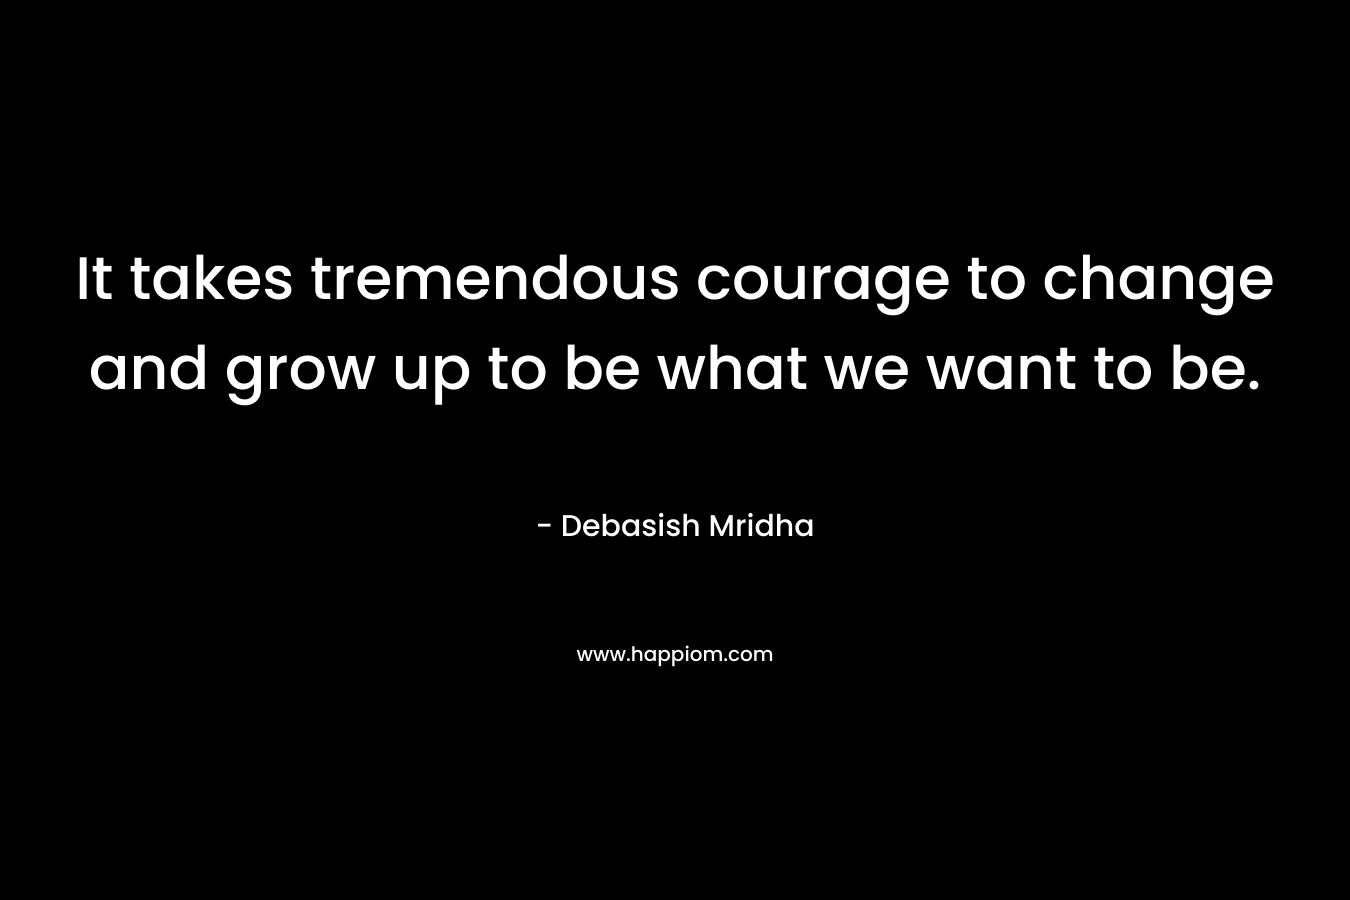 It takes tremendous courage to change and grow up to be what we want to be.